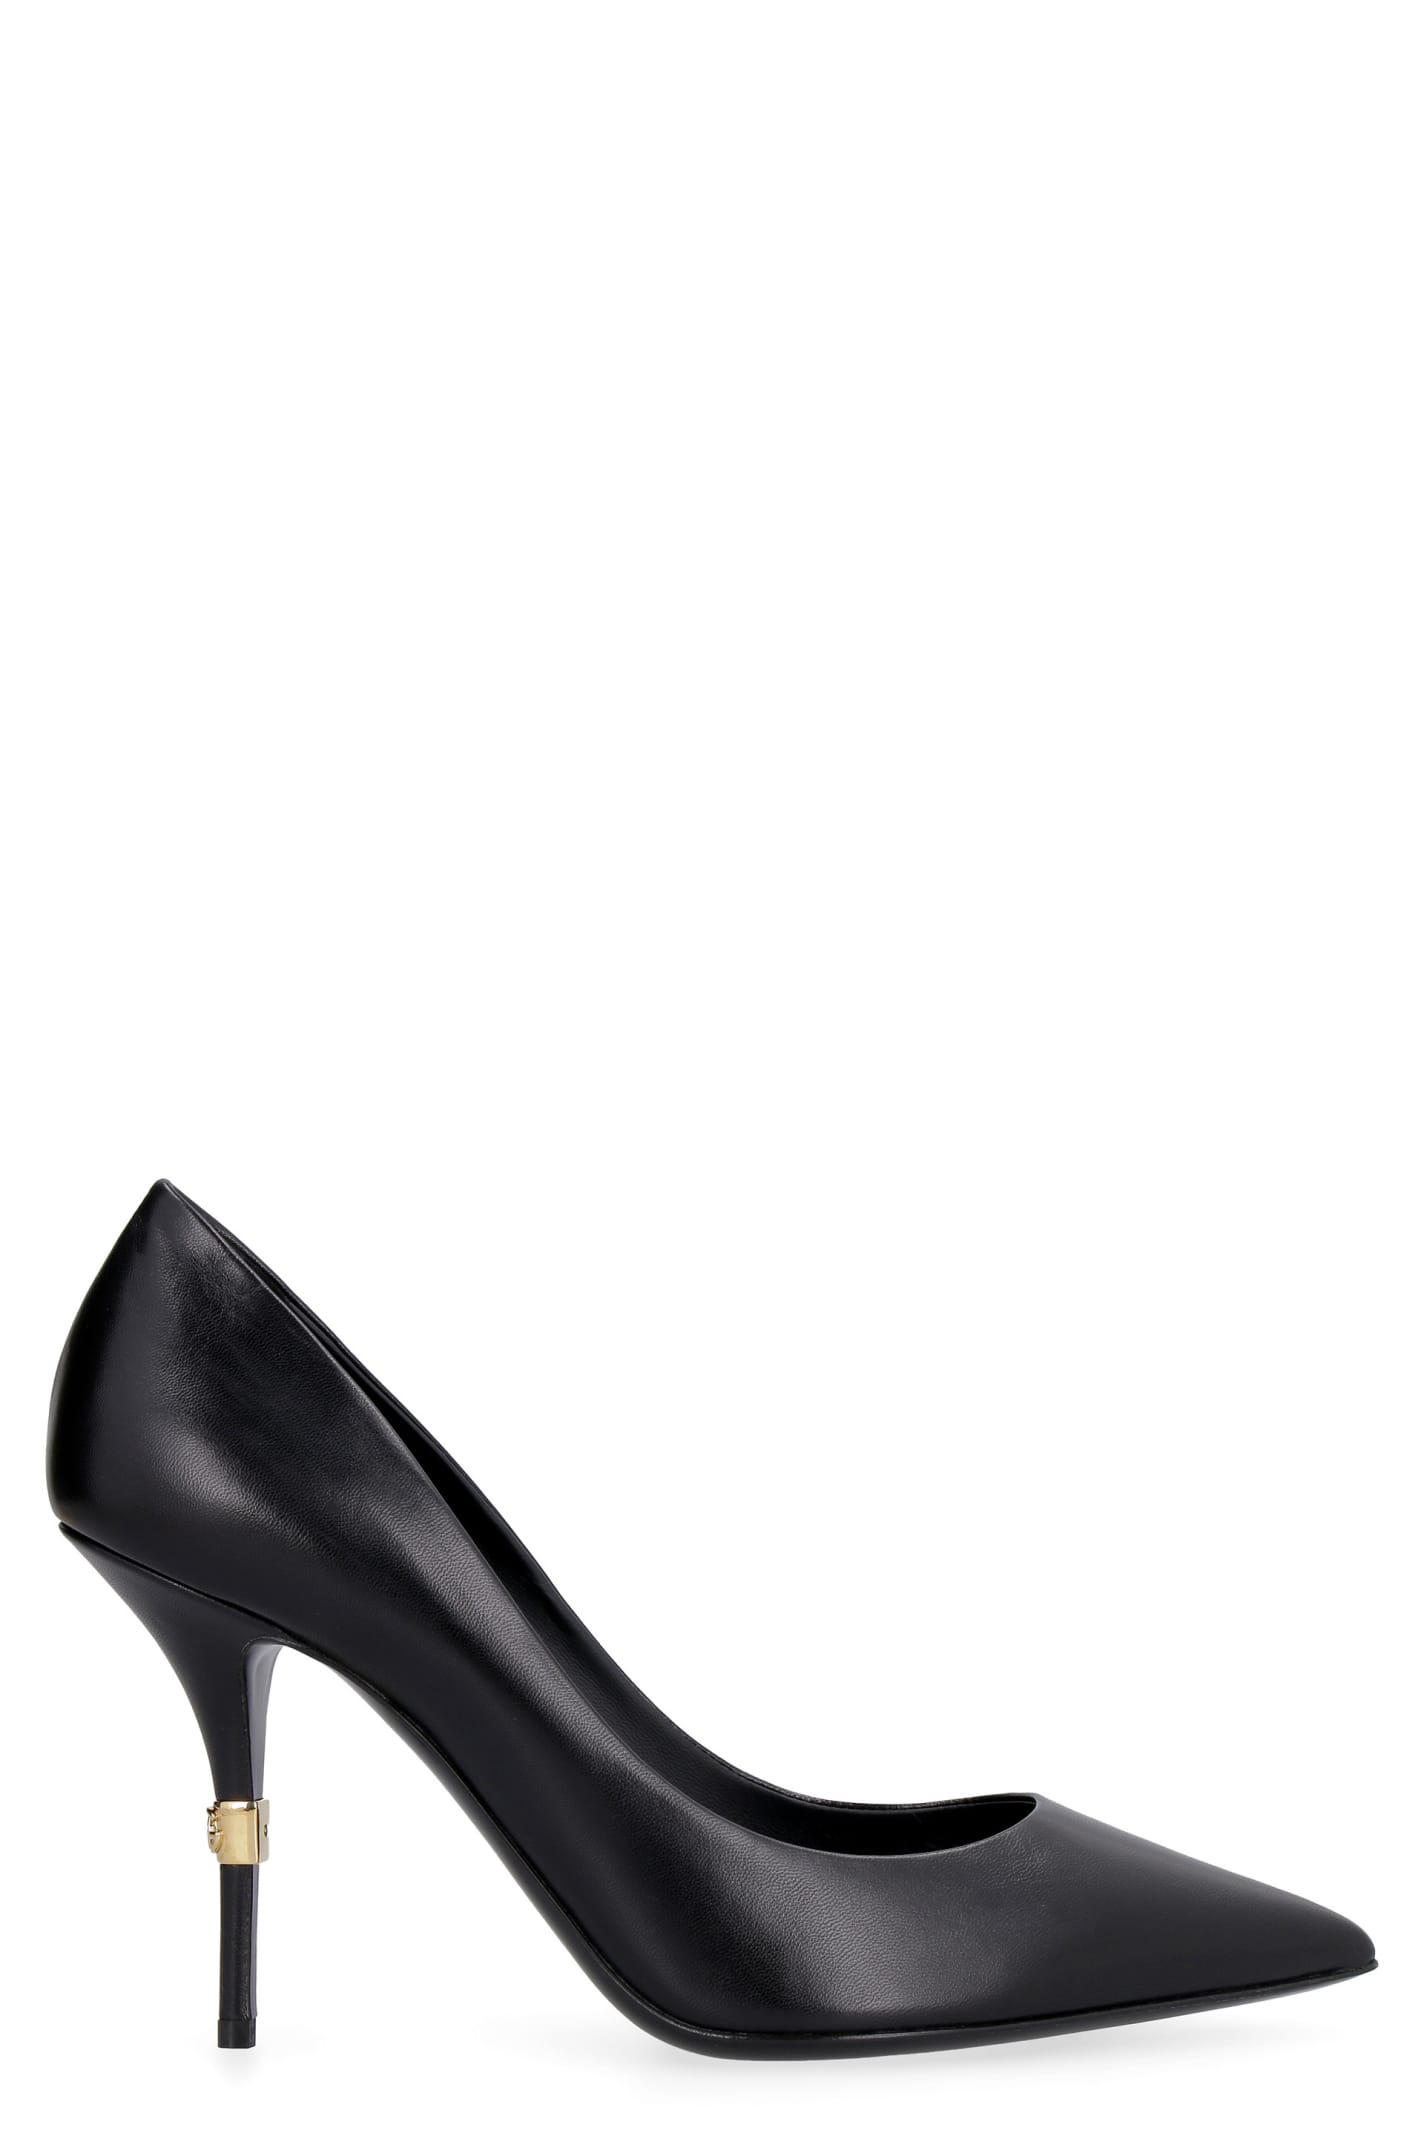 Dolce & Gabbana Cardinale Leather Pointy-toe Pumps